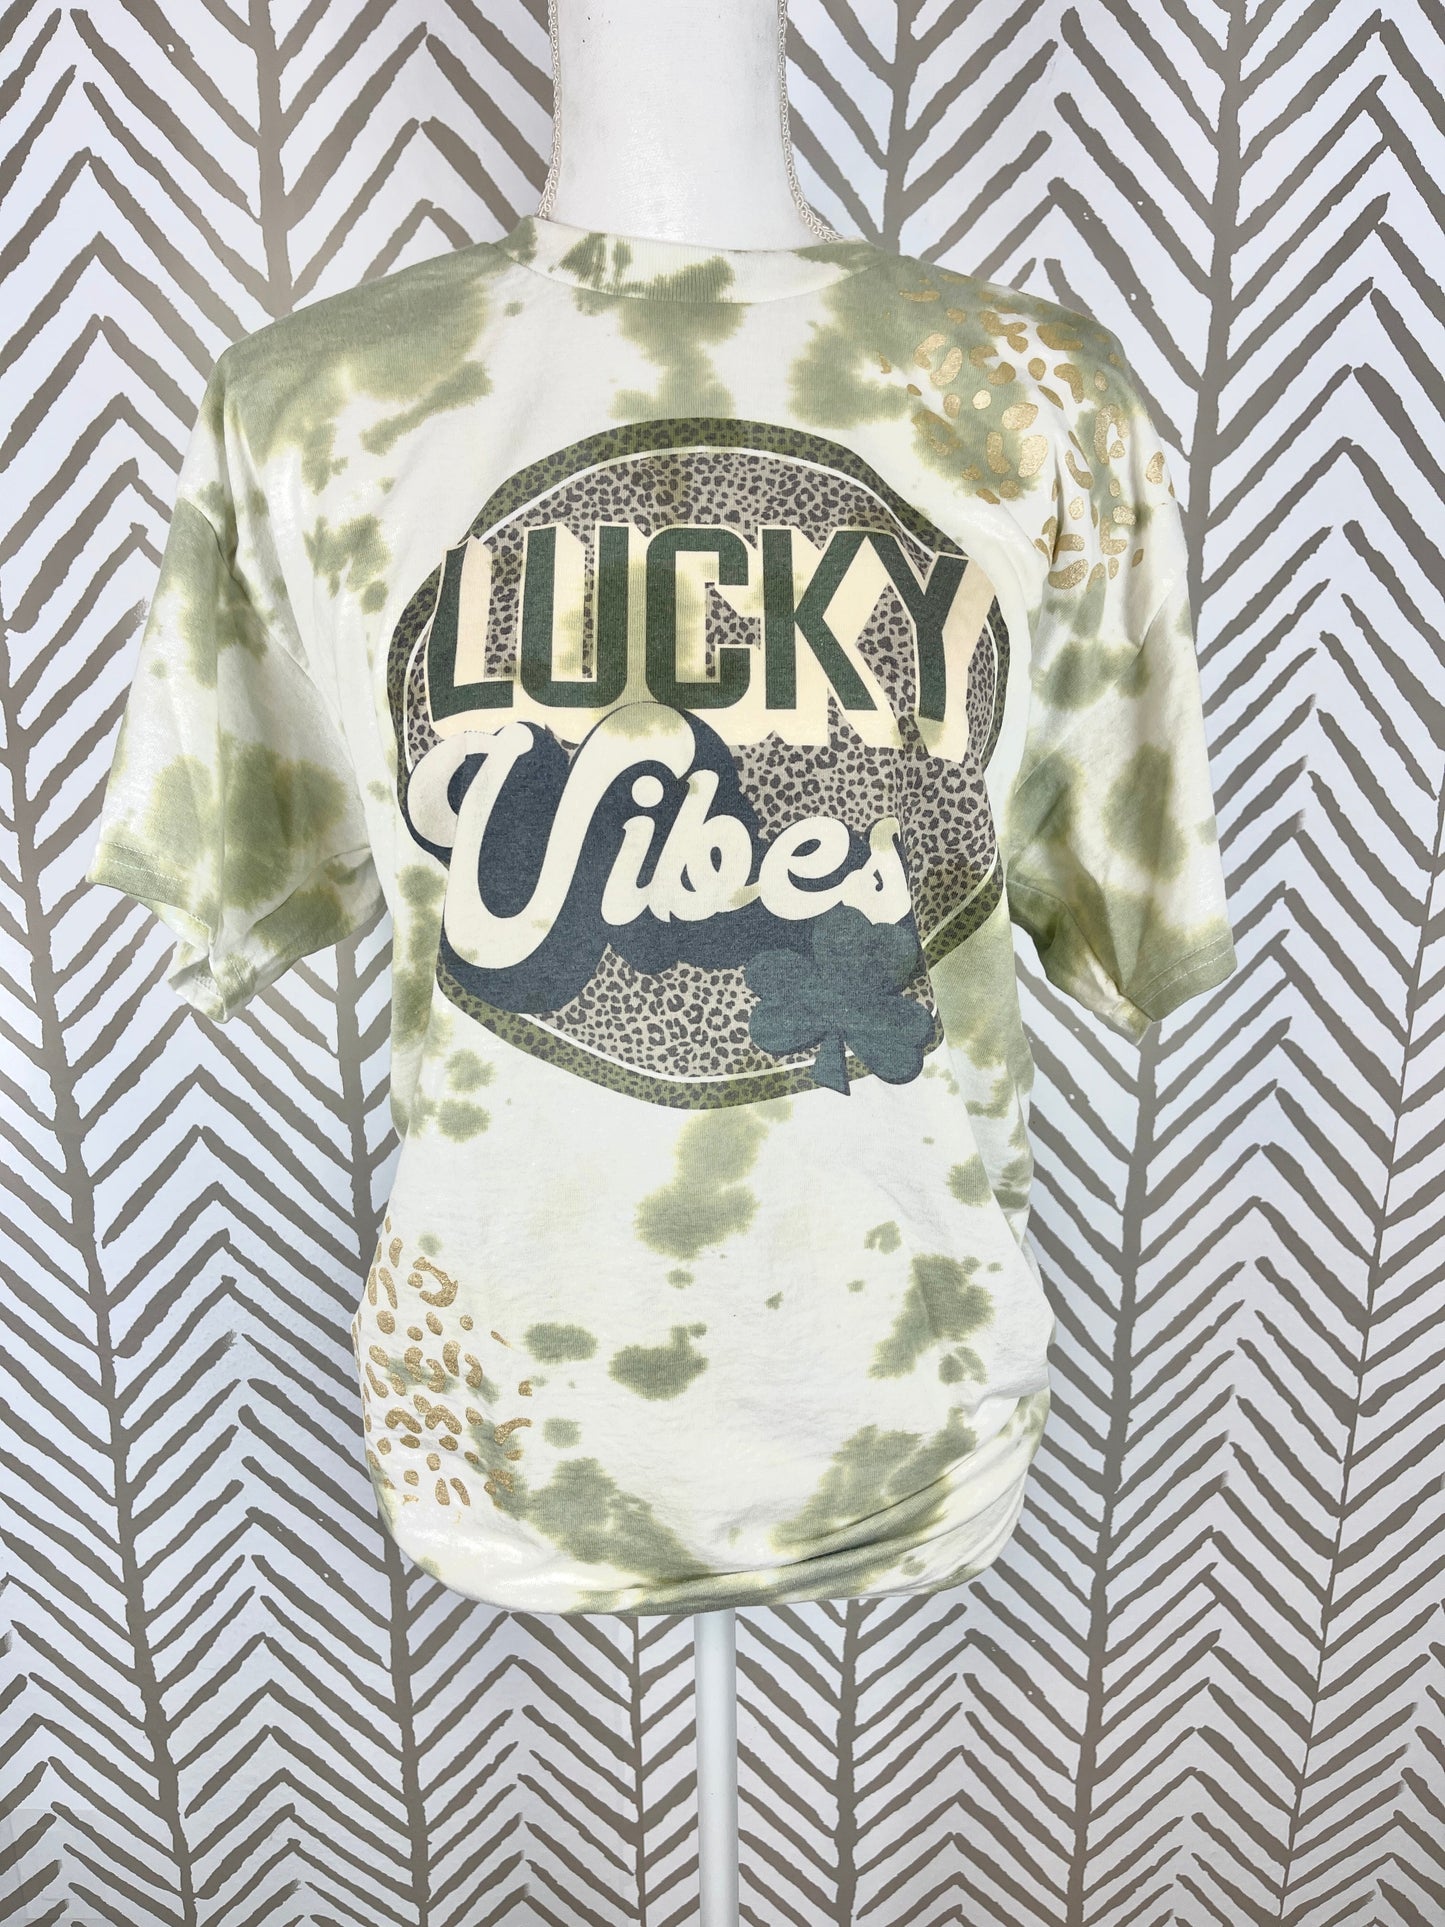 Lucky vibes gold leopard